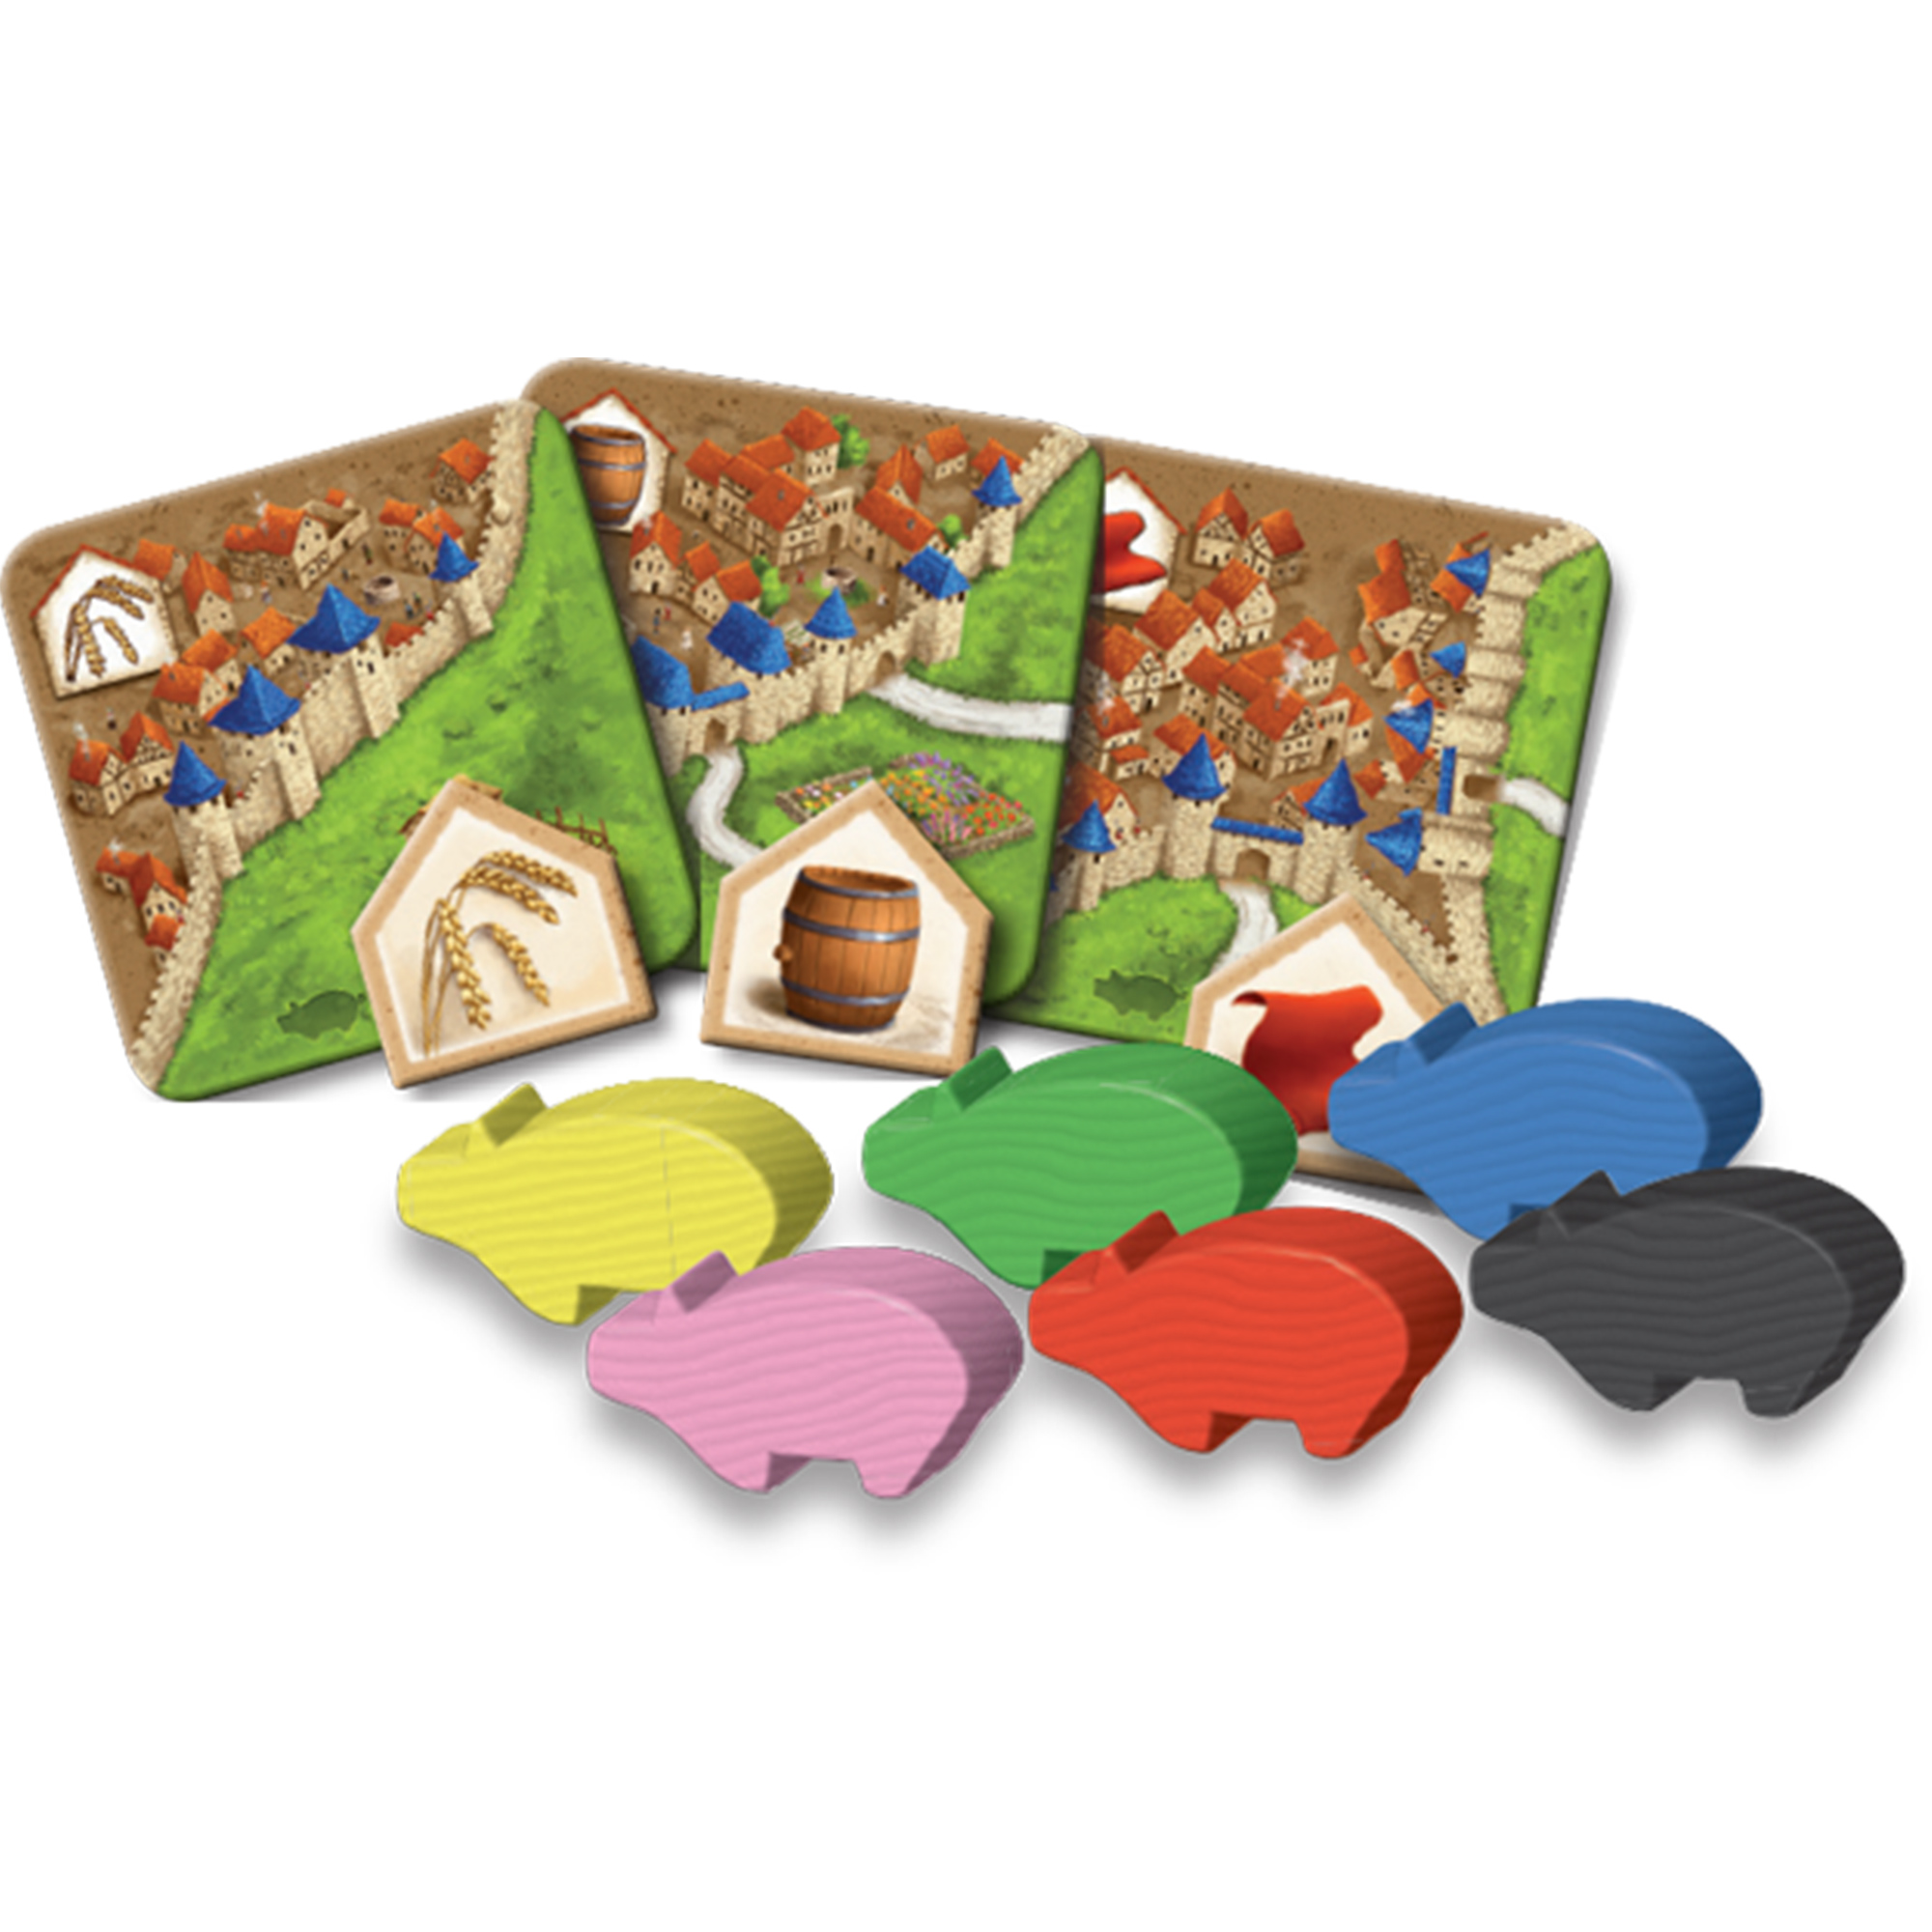 Carcassonne Expansion 2: Traders & Builders Board Game for Ages 7 and Up, from Asmodee - image 5 of 7